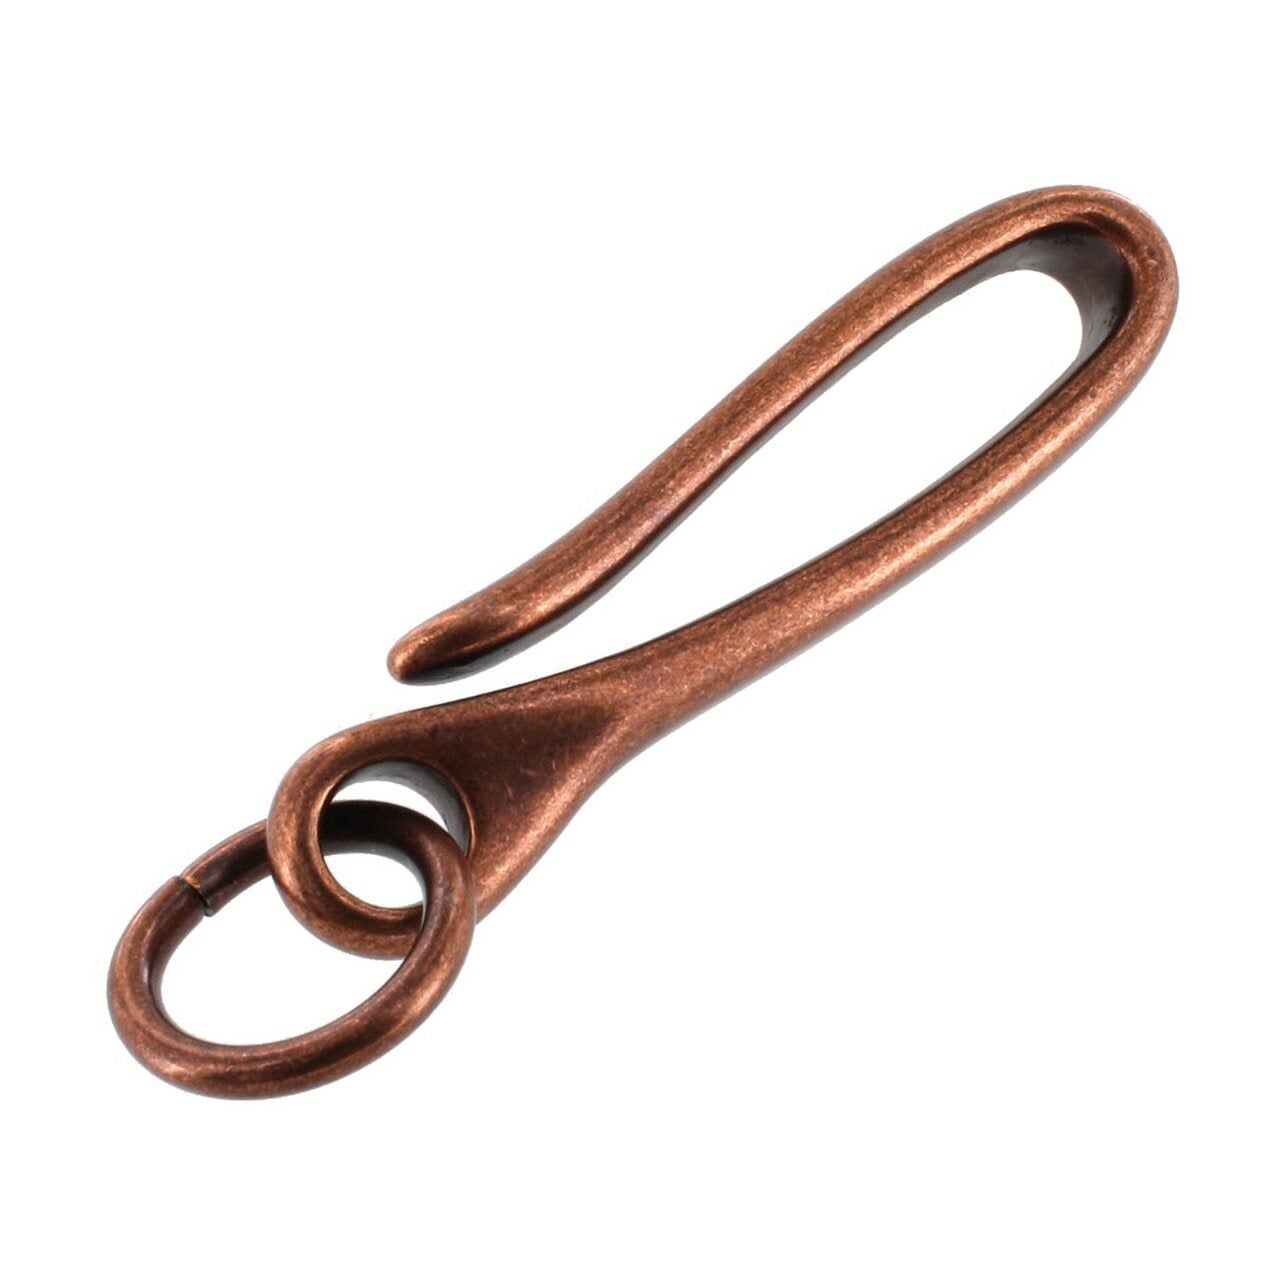 Fish Hook Key Chain - Antique Copper  Canadian Owned Leathercraft Supply  Store focusing on Quality Leather, Hardware, Tools and Leatherworking  Machines - Longview Leather